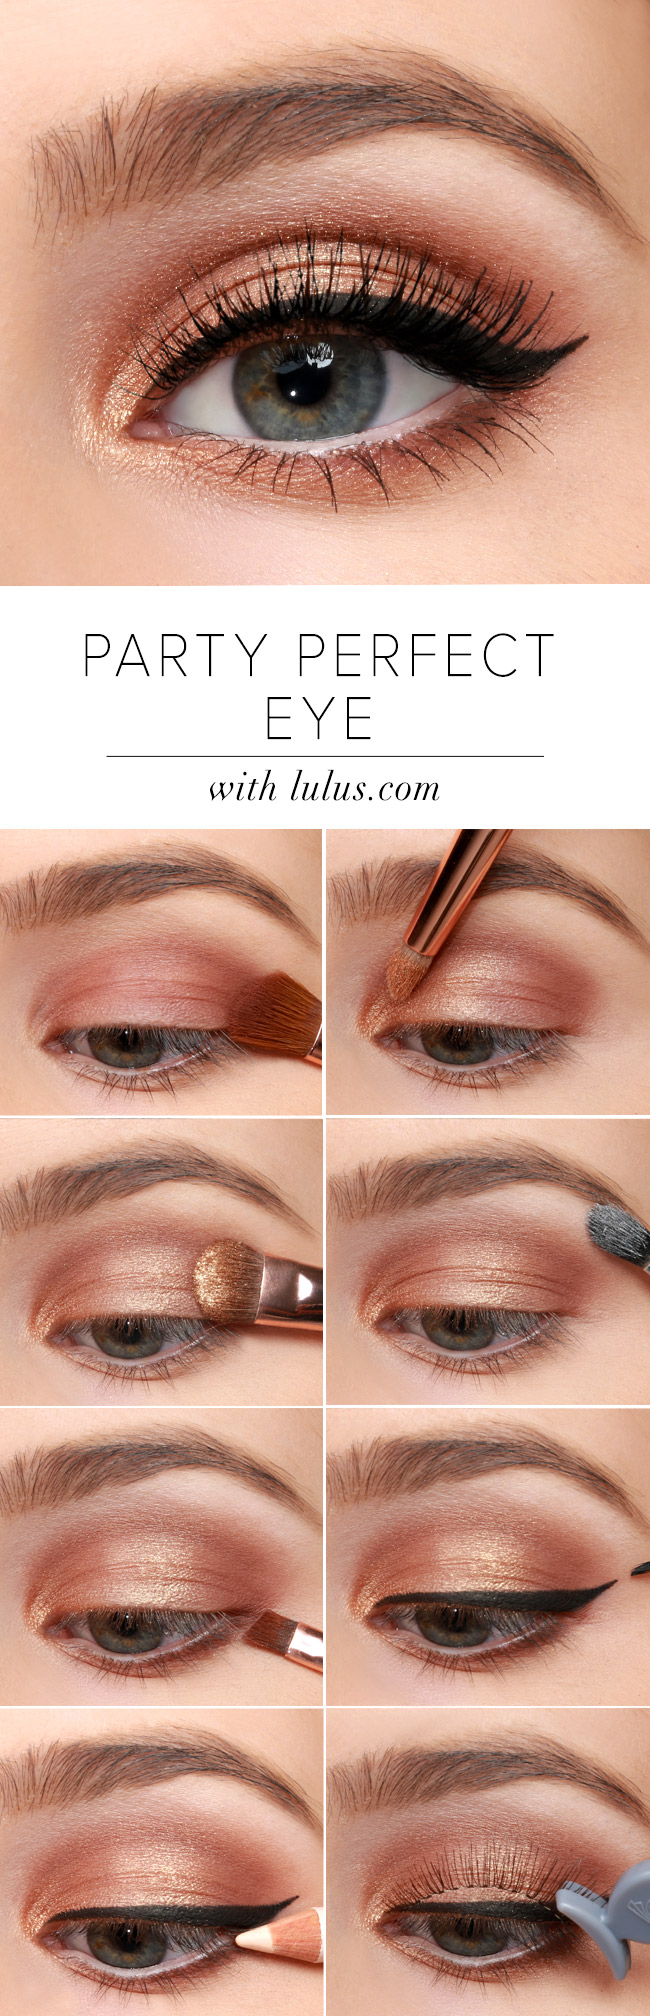 Party Eye Makeup Lulus How To Party Perfect Eye Makeup Tutorial Lulus Fashion Blog